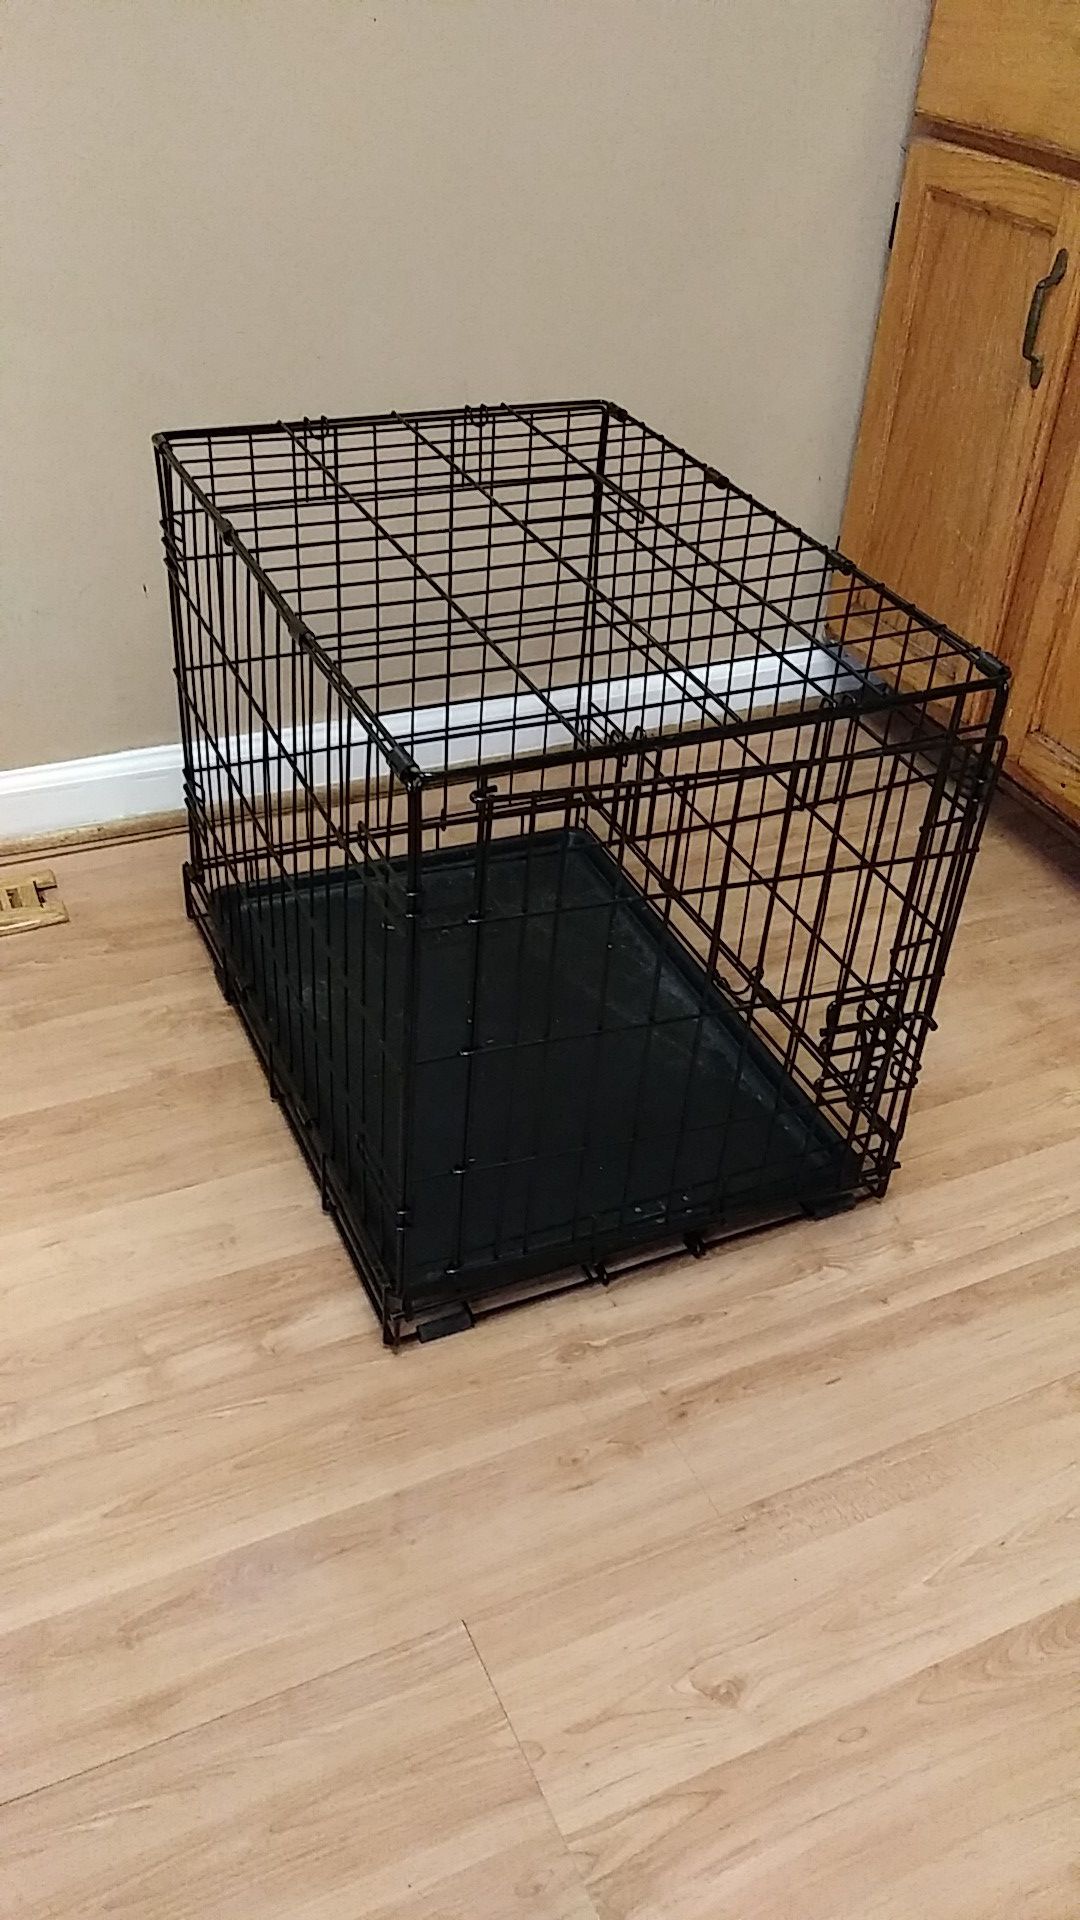 New Small dog kennel / crate